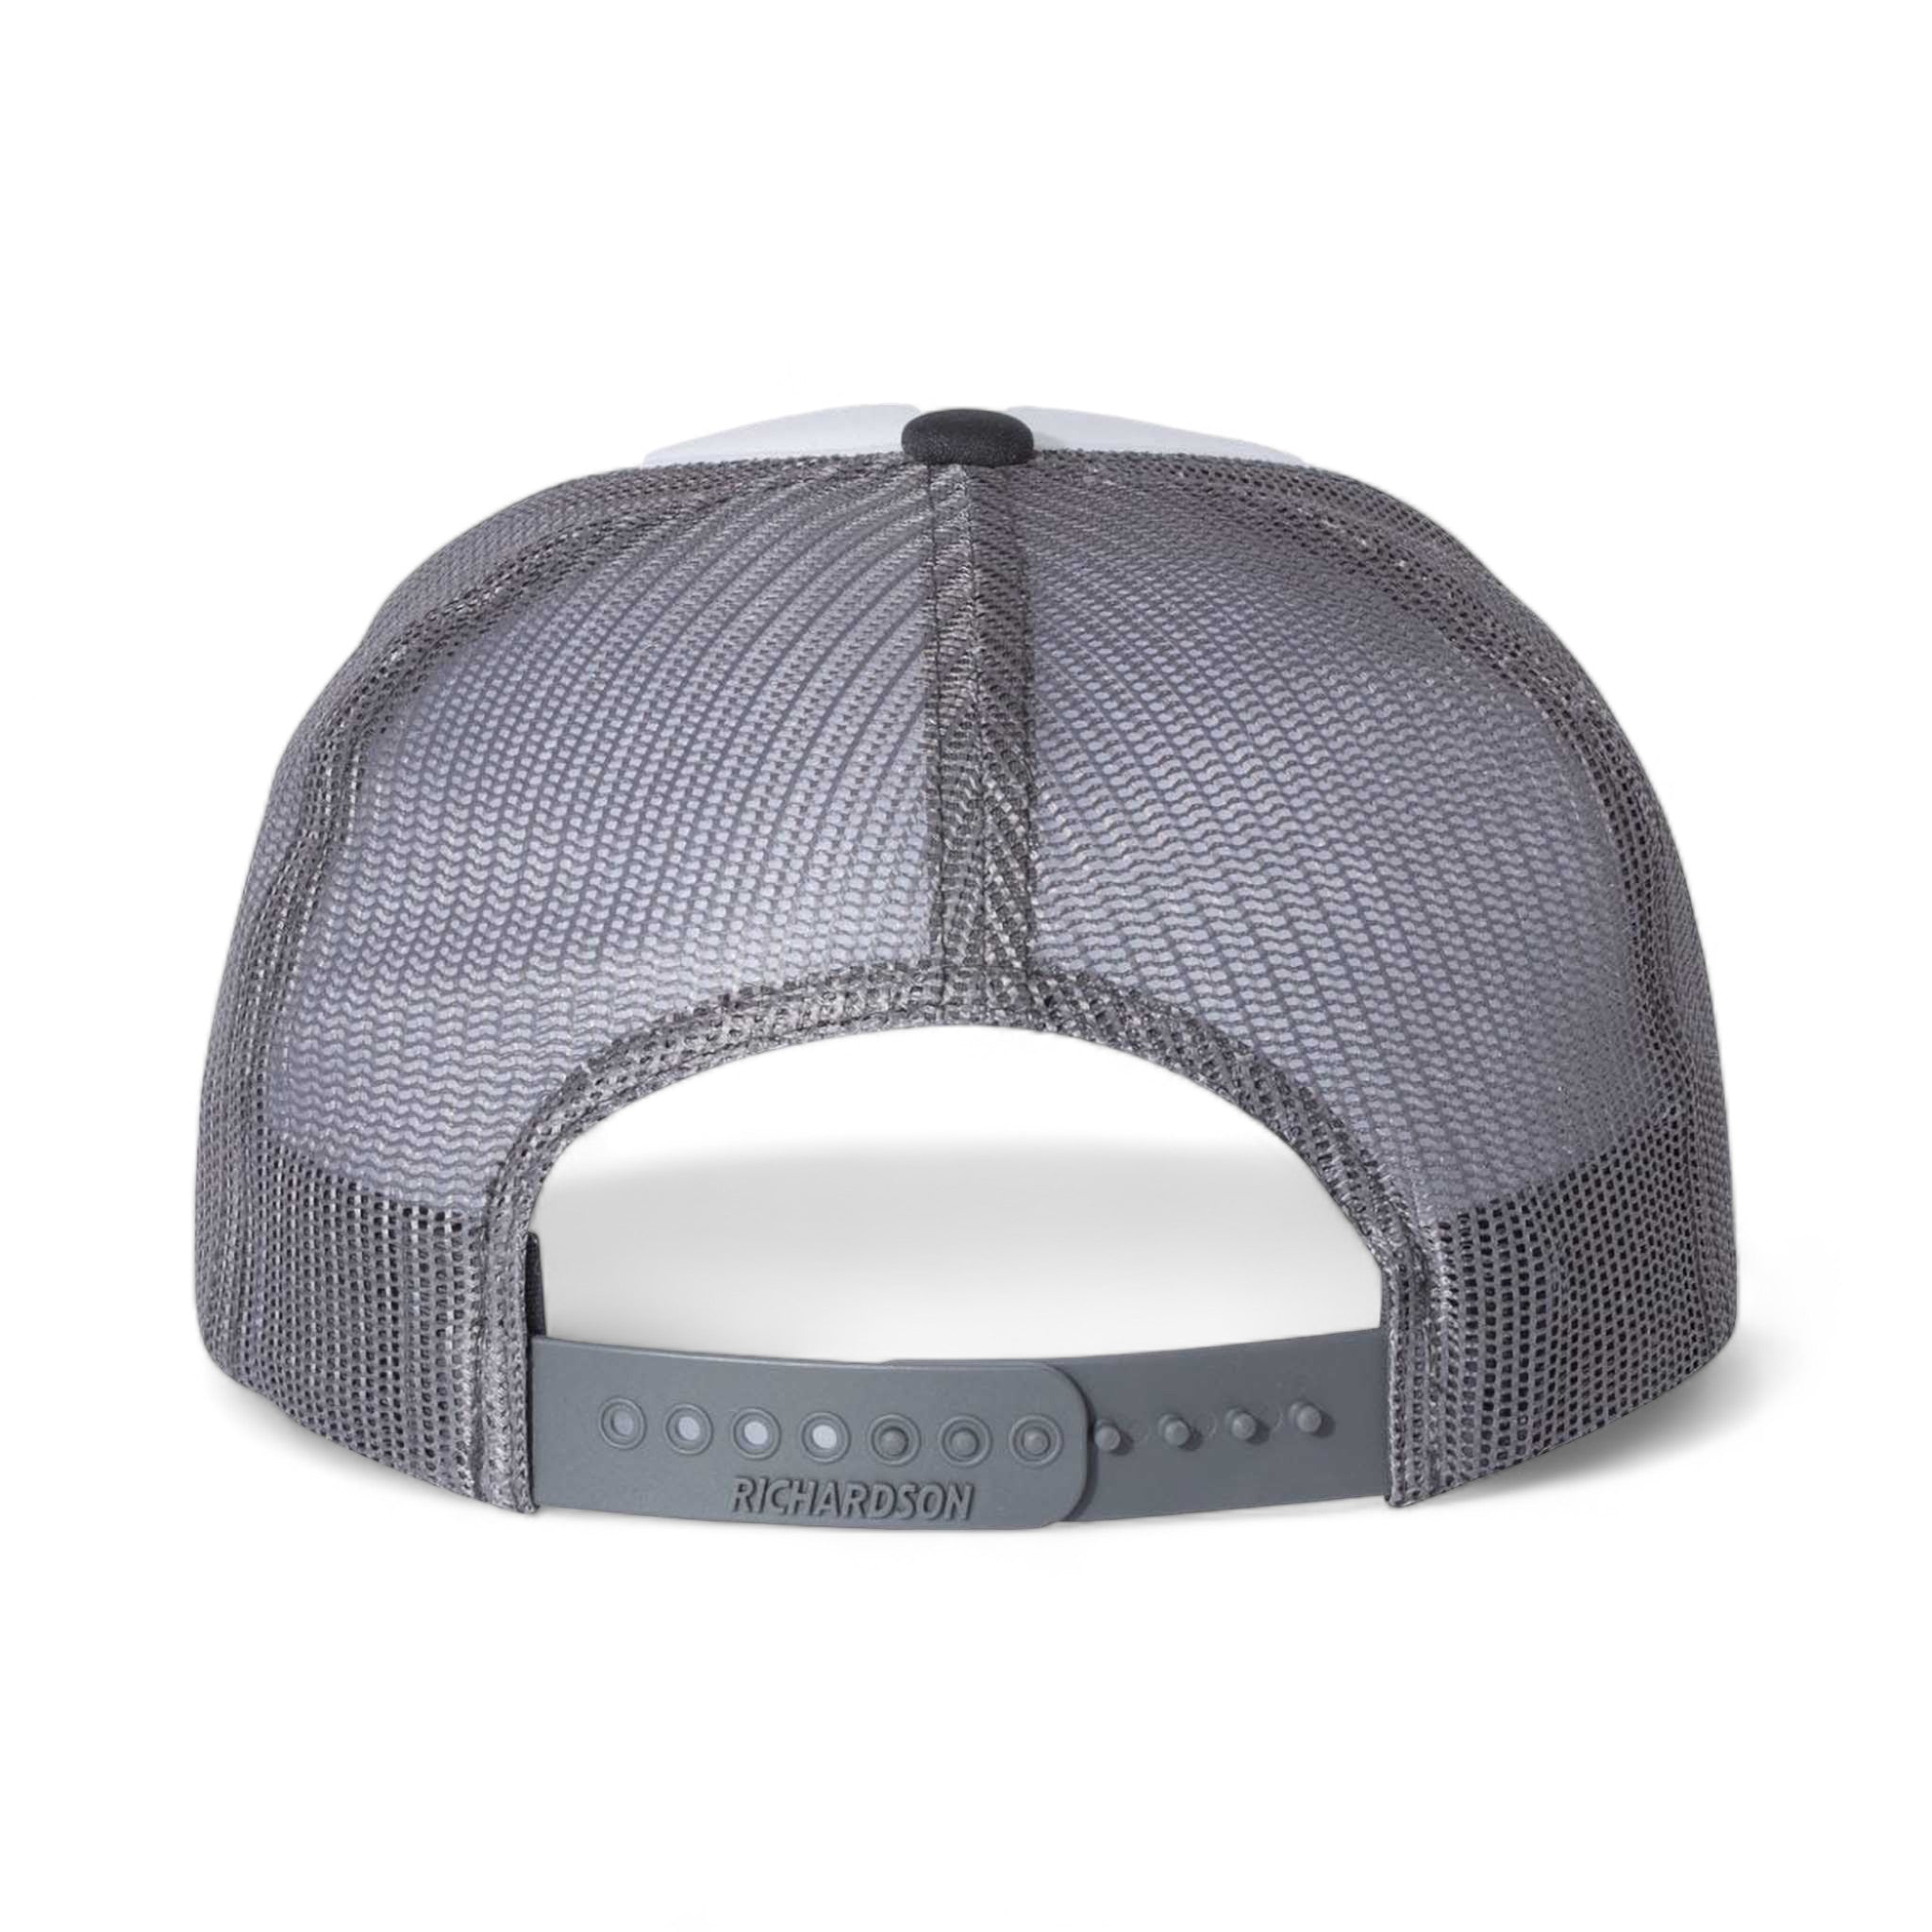 Back view of Richardson 113 custom hat in white and charcoal